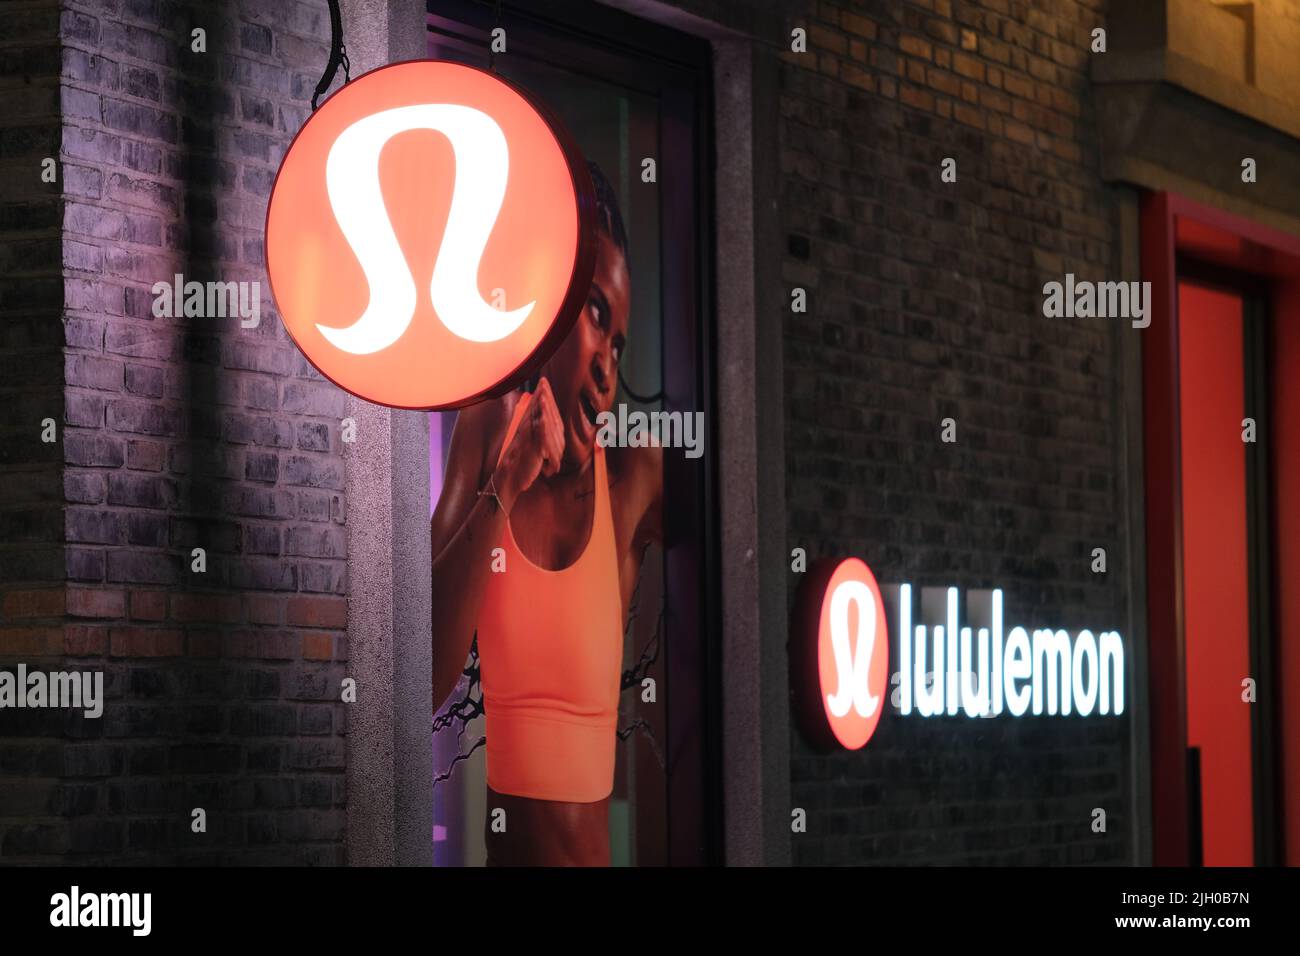 Shanghai,China-Feb.20th 2022: Lululemon Athletica brand sign at night outside store. Stock Photo